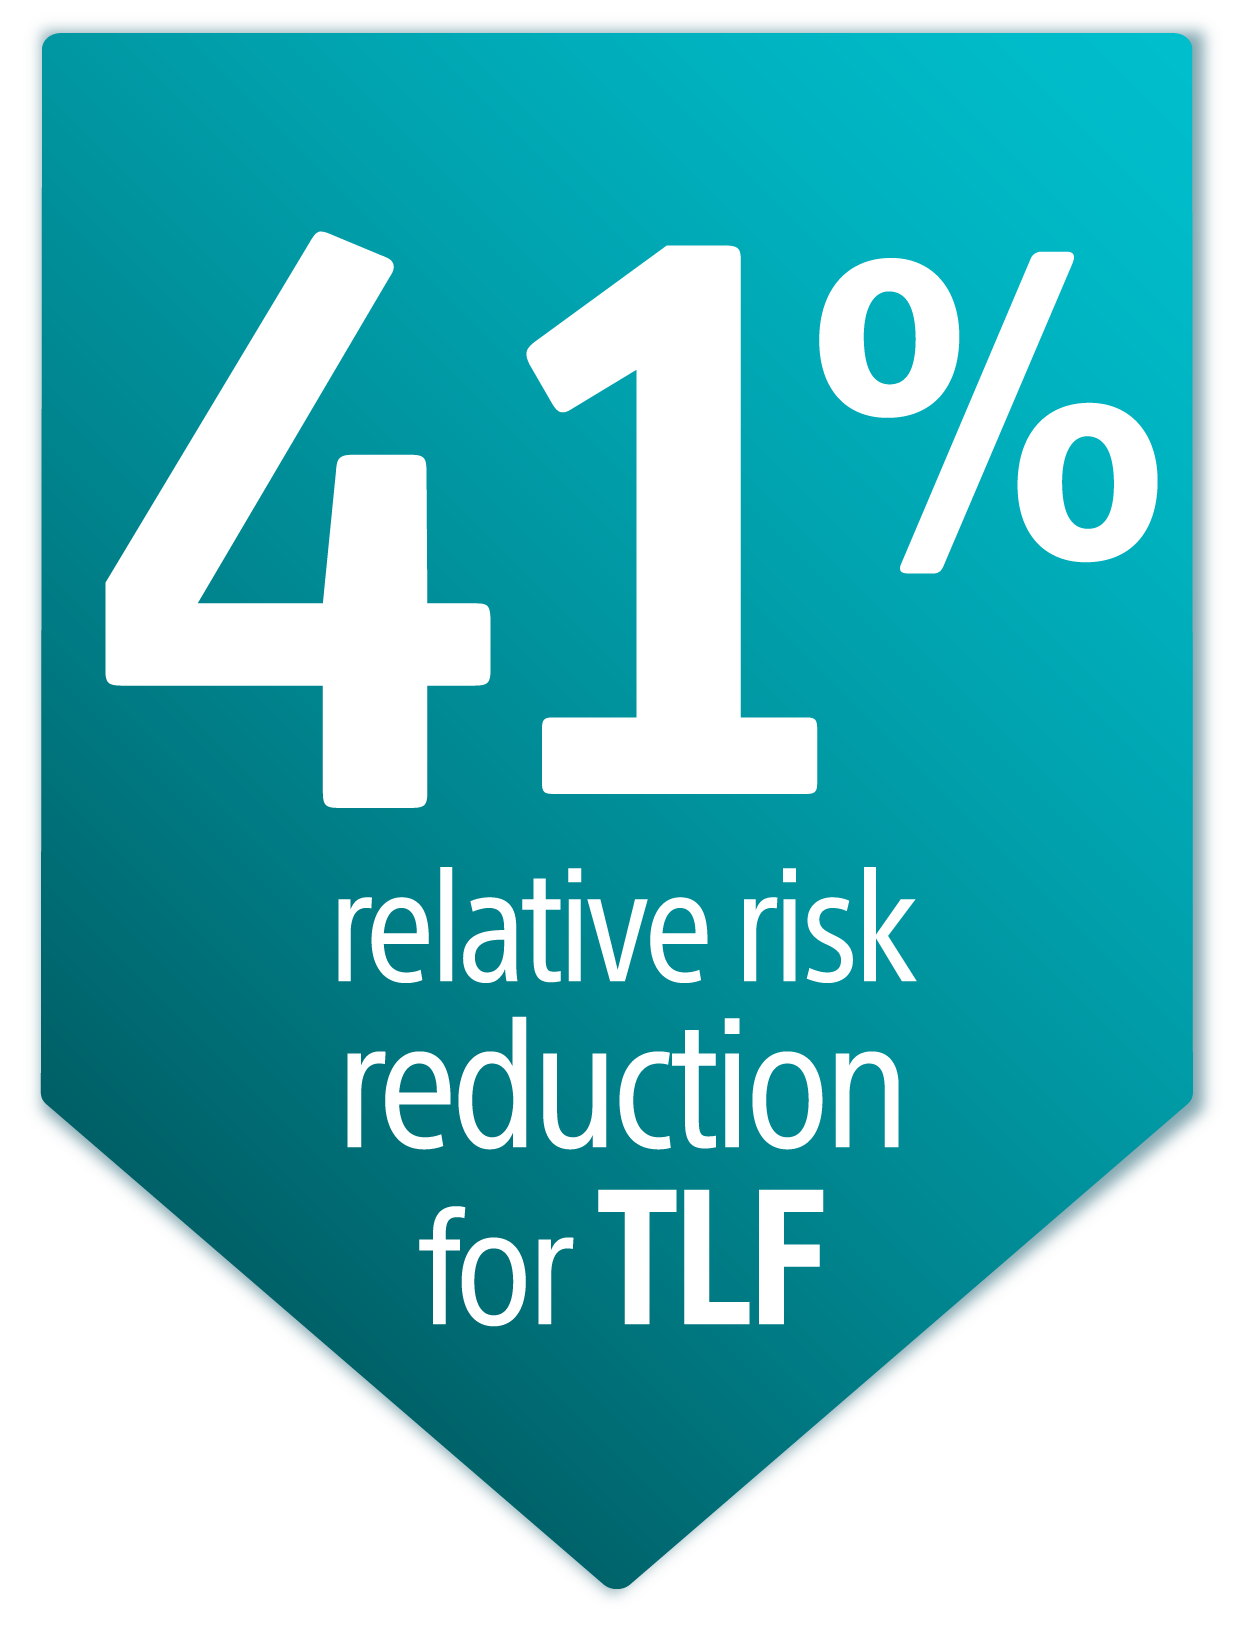 41% relative risk reduction for TLF